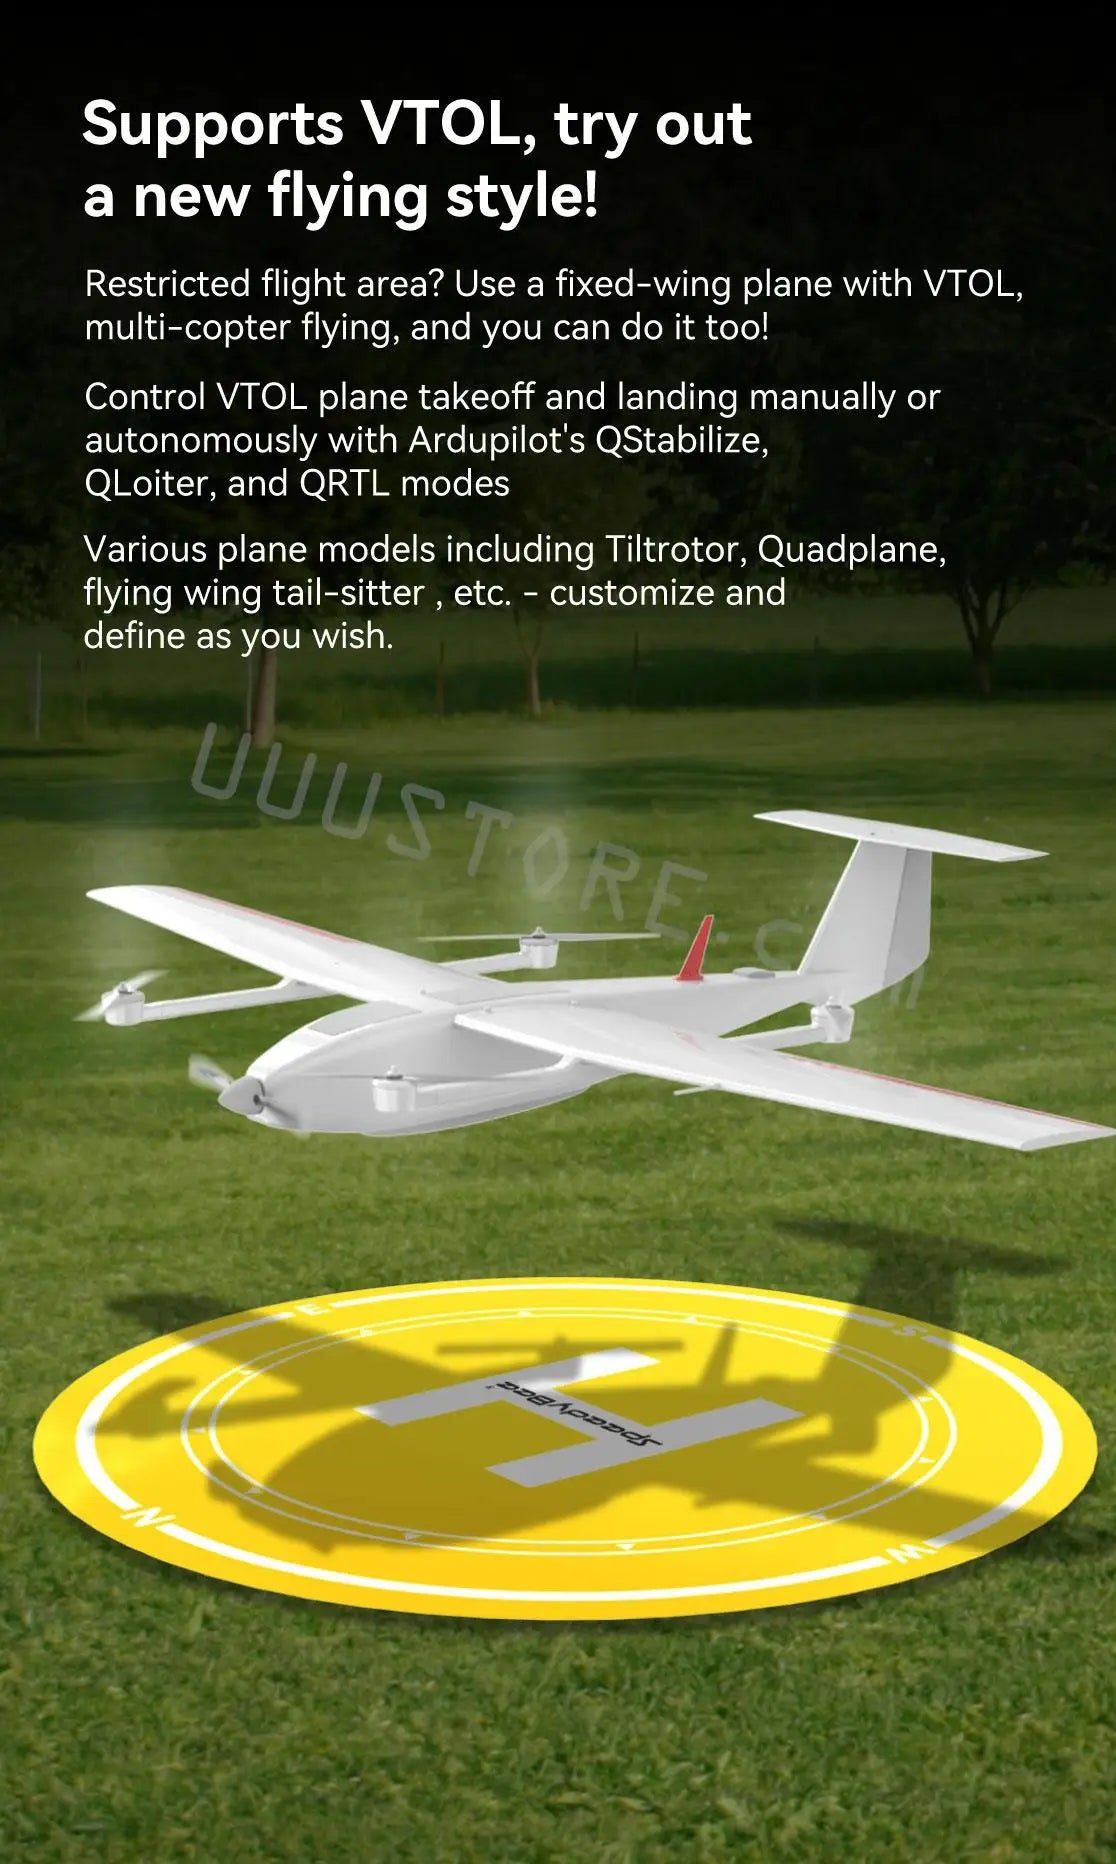 use a fixed-wing plane with VTOL, out a new flying stylel